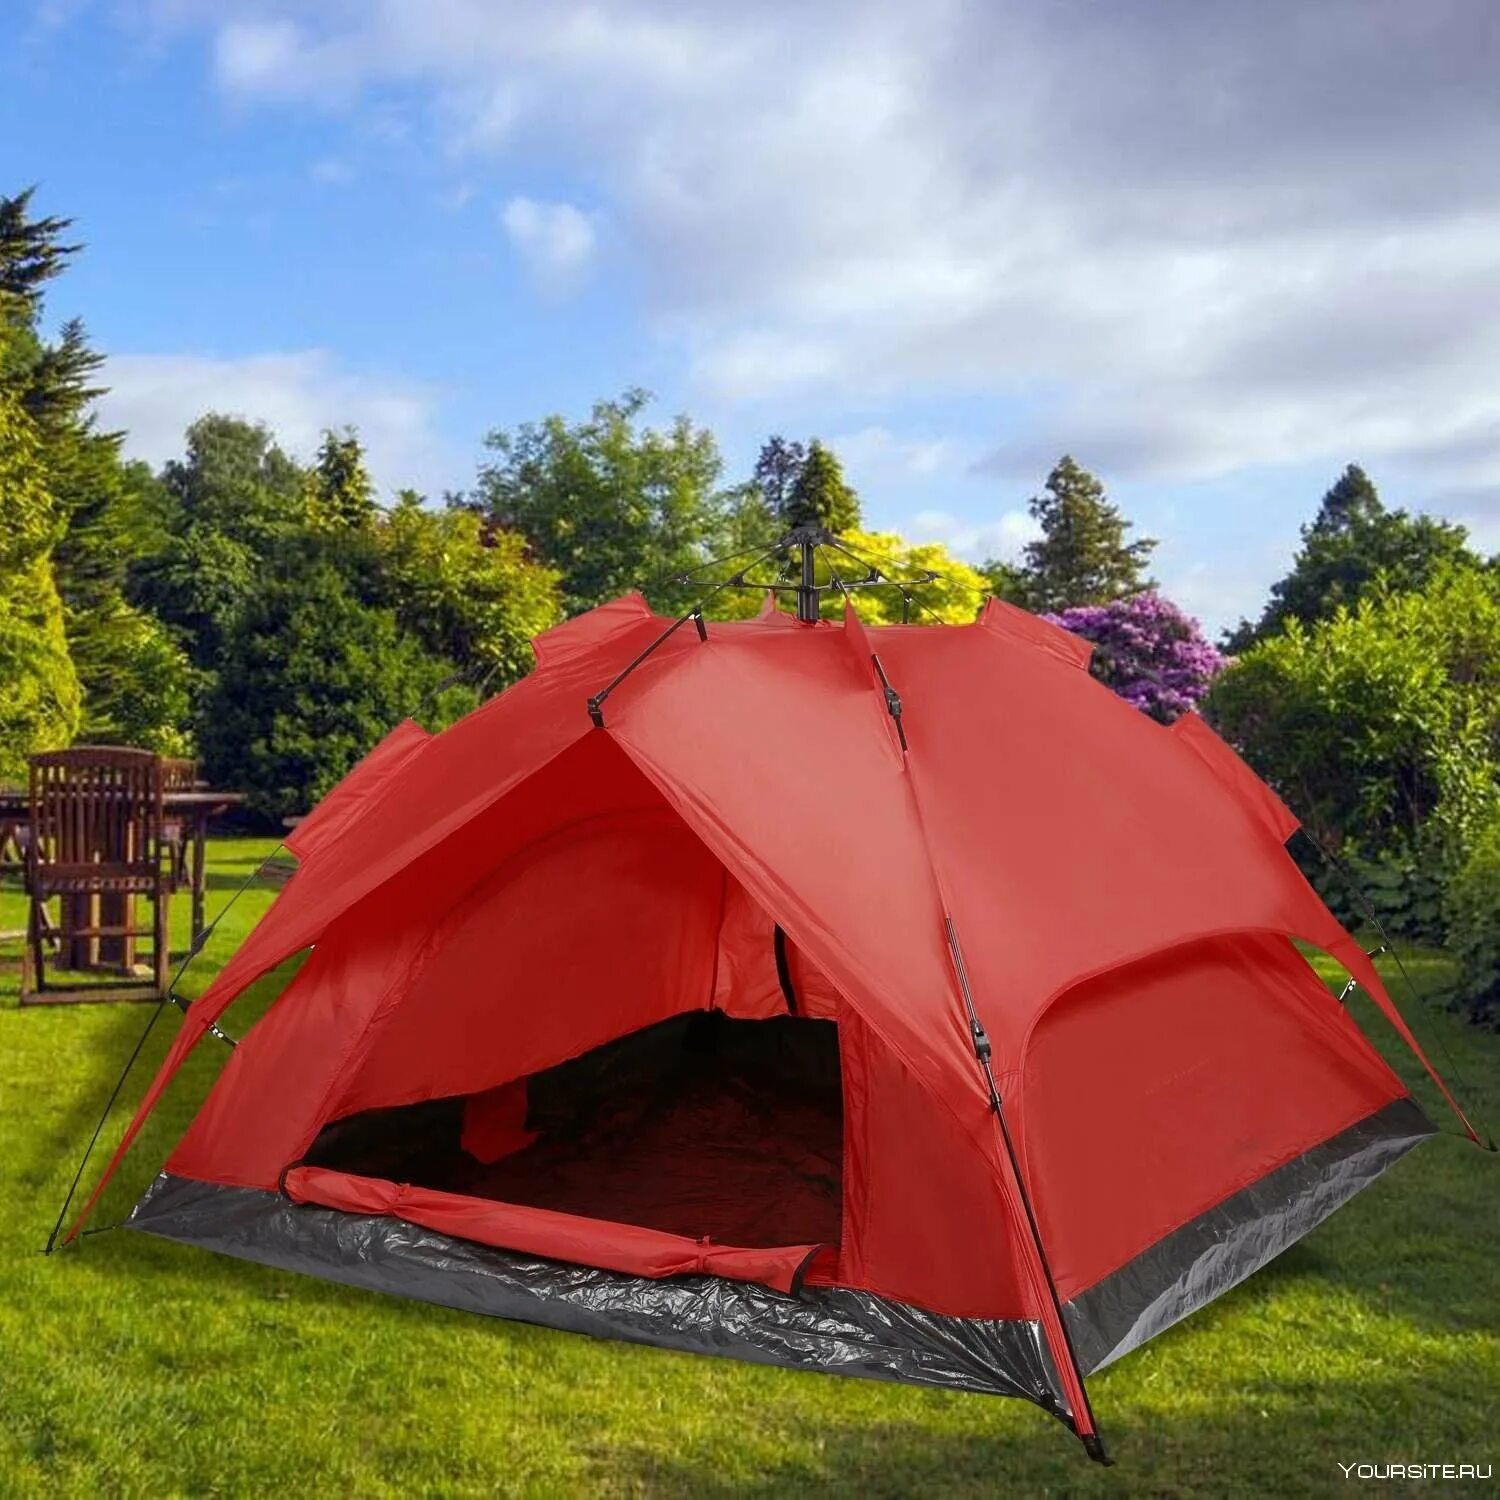 Палатка Camping Tent. Best Camp Dome 2 палатка. Палатка Трамп Камп 5. Палатка Круз Камп.